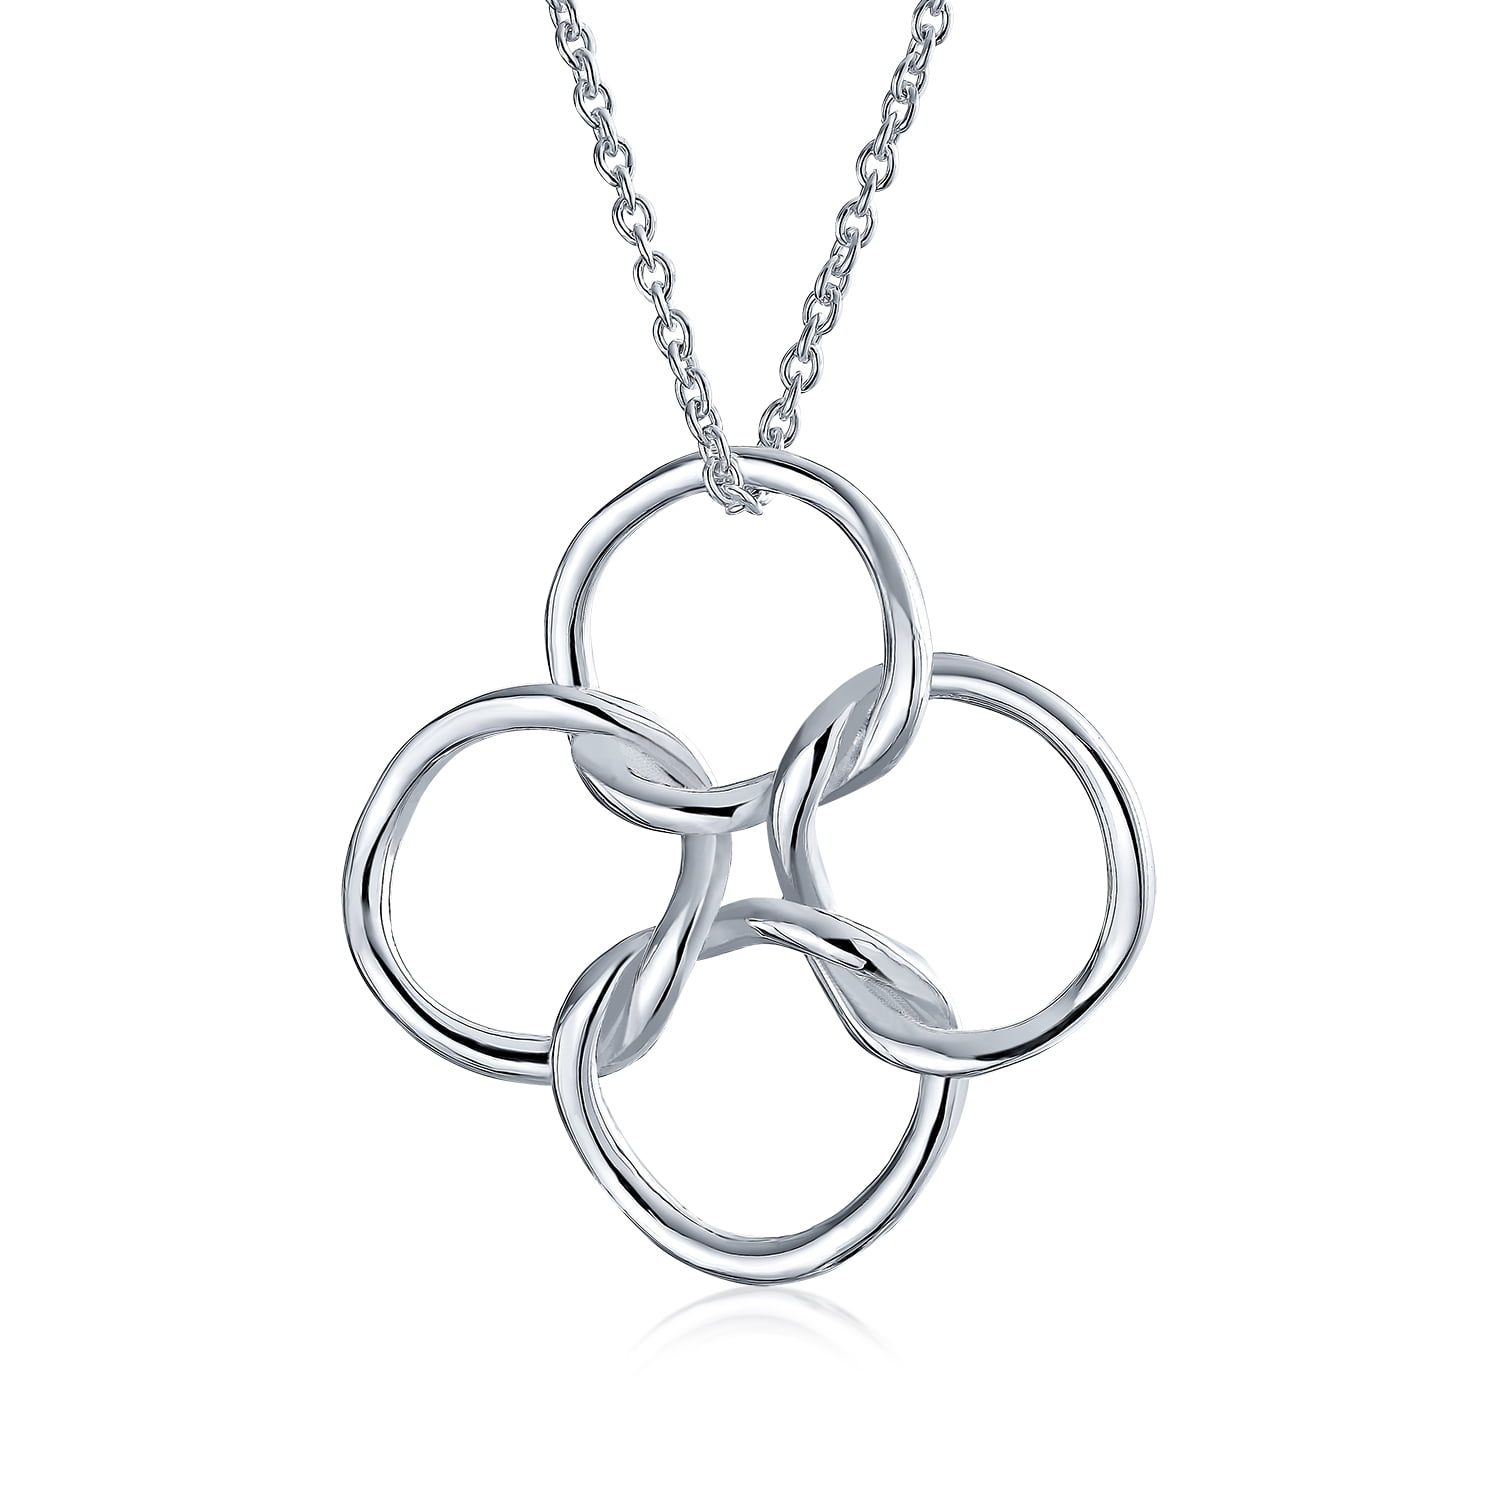 6 Leaf Clover Initial Necklace in Sterling Silver - MYKA